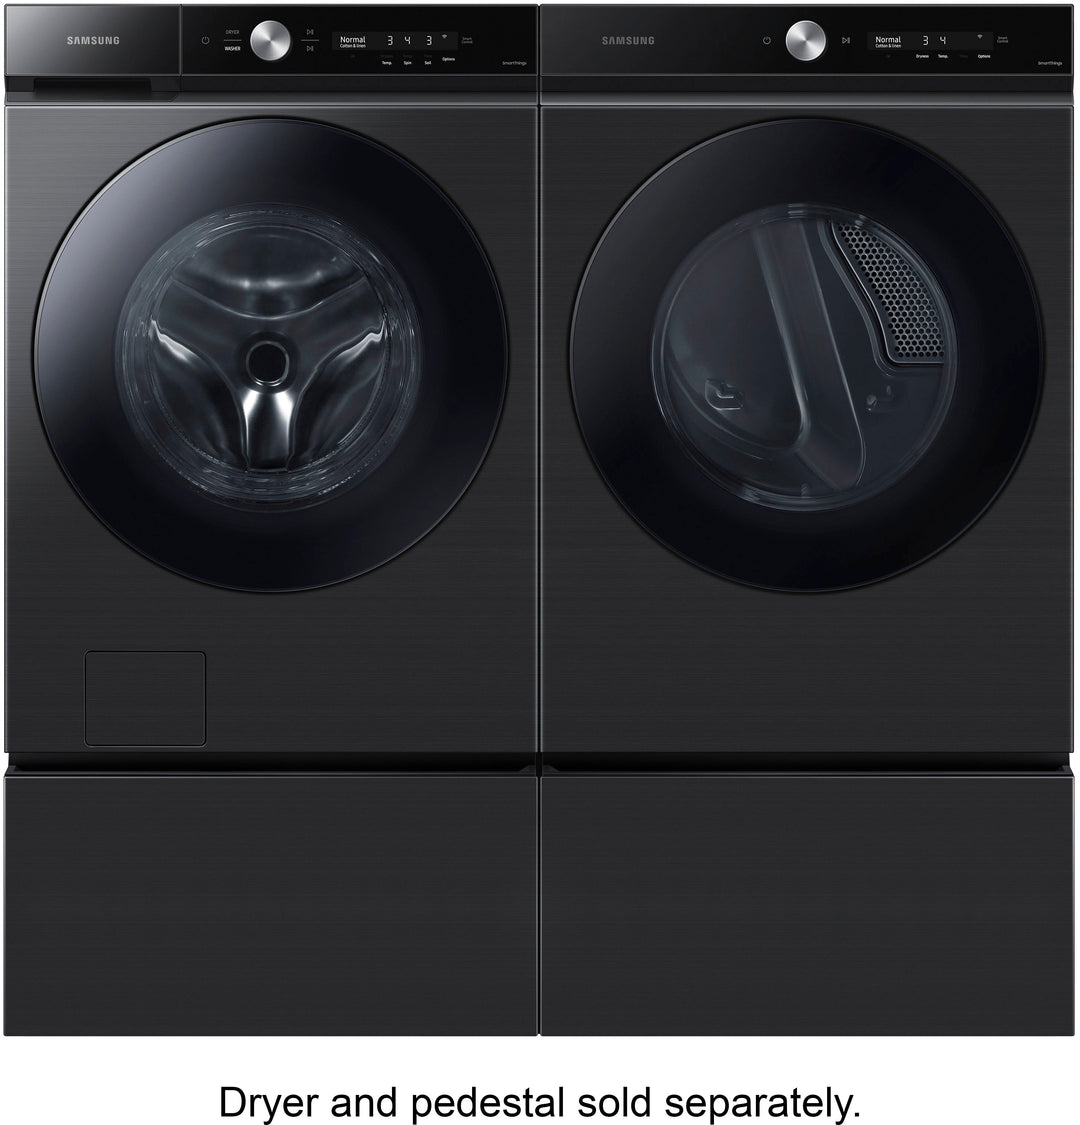 Samsung - Bespoke 5.3 cu. ft. Ultra Capacity Front Load Washer with Super Speed Wash and AI Smart Dial - Brushed black_11